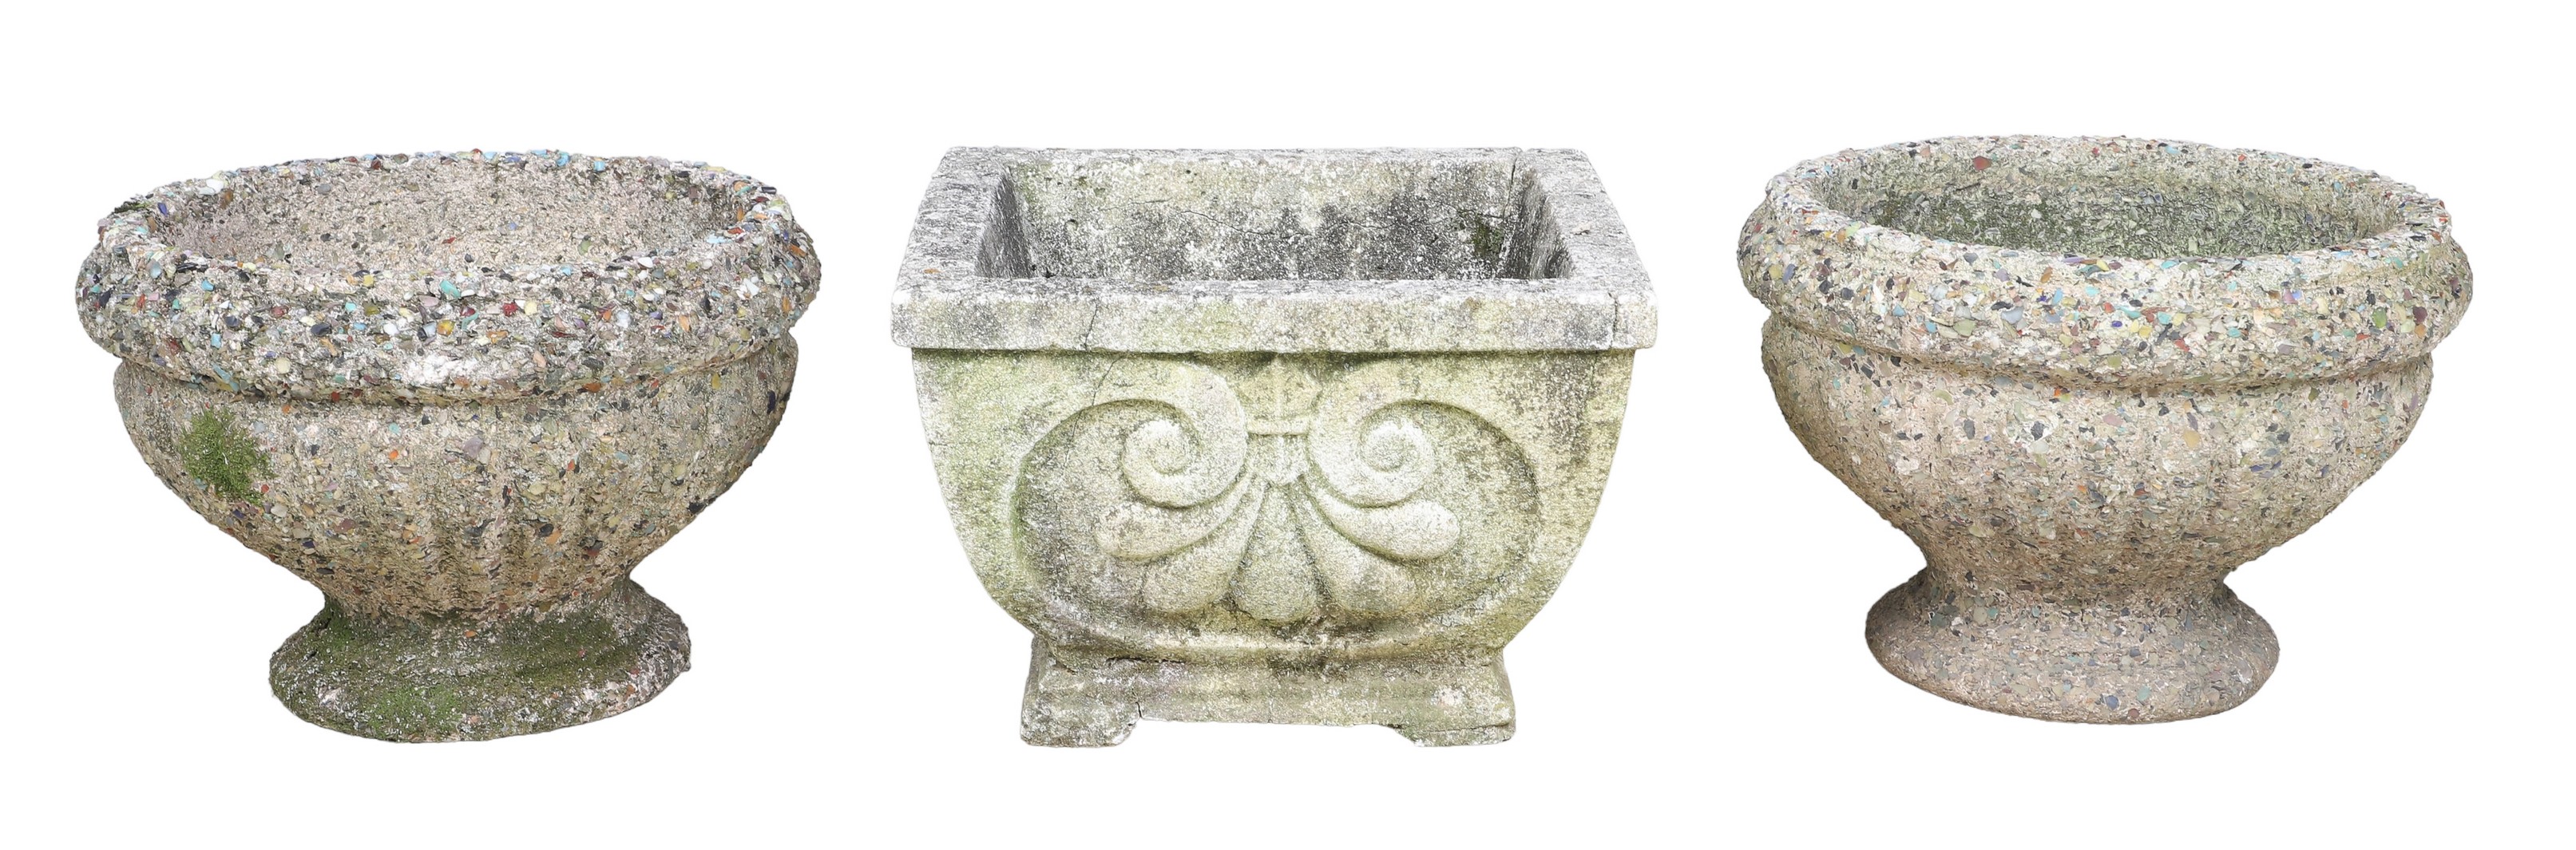  3 Cement planters c o pair and 2e1032